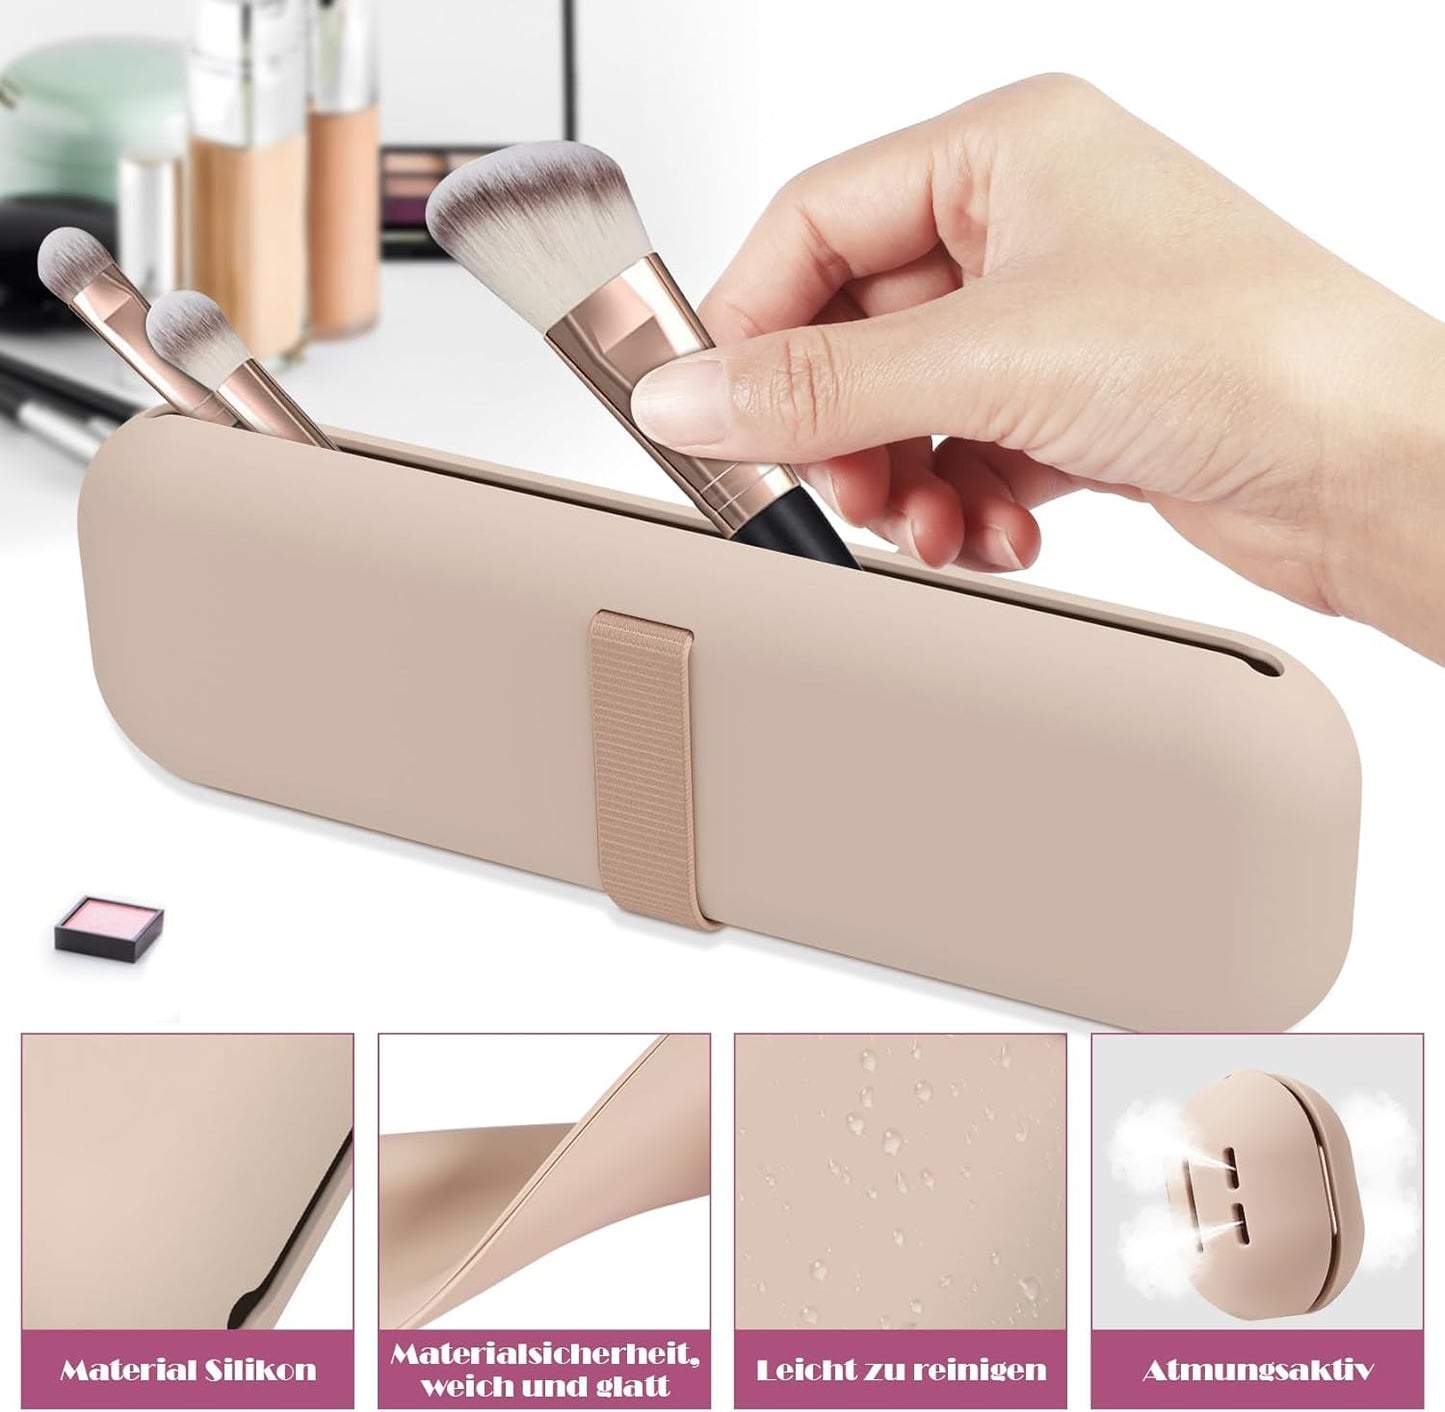 BSJIASHIWEI 2 x Portable Cosmetic Bag with Adhesive Tape, 1 x Silicone Makeup Brush Holder + 1 x Makeup Sponge Holder, Brush Cosmetic Bag, Makeup Brush Organiser for Travel Storagee (Khaki)